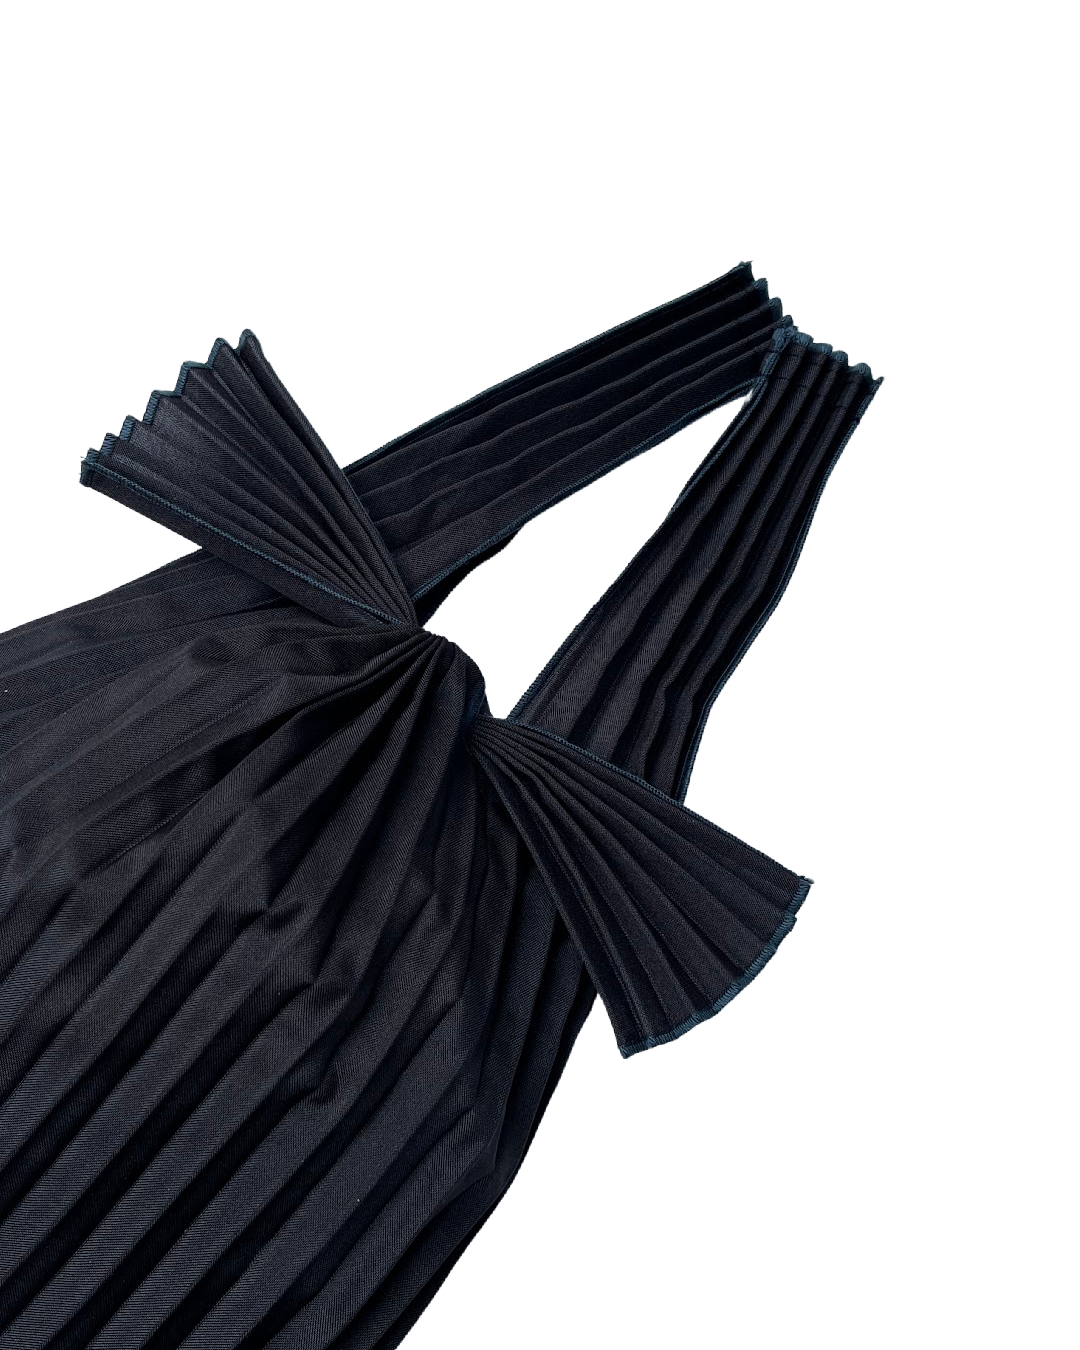 Large Black Pleated Pleco Tote Bag by KNA Plus at Abacus Row